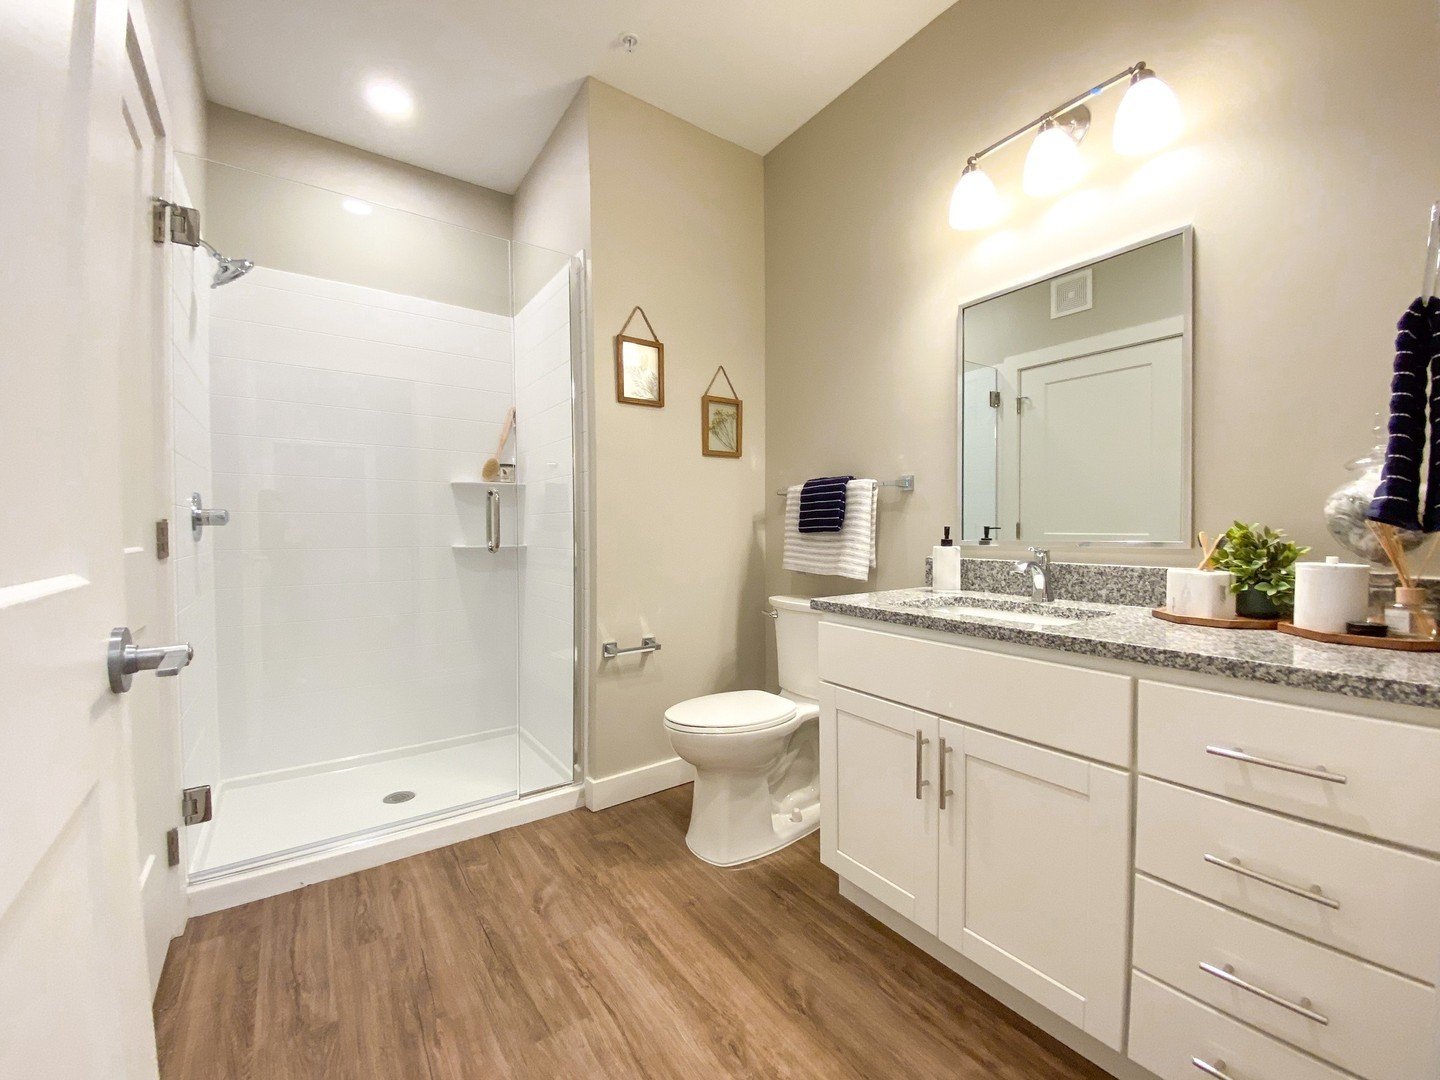 Who wouldn't love all of this bathroom space? We think you should come and make it your own! 😊⁠
⁠
Give us a call today to schedule your tour!